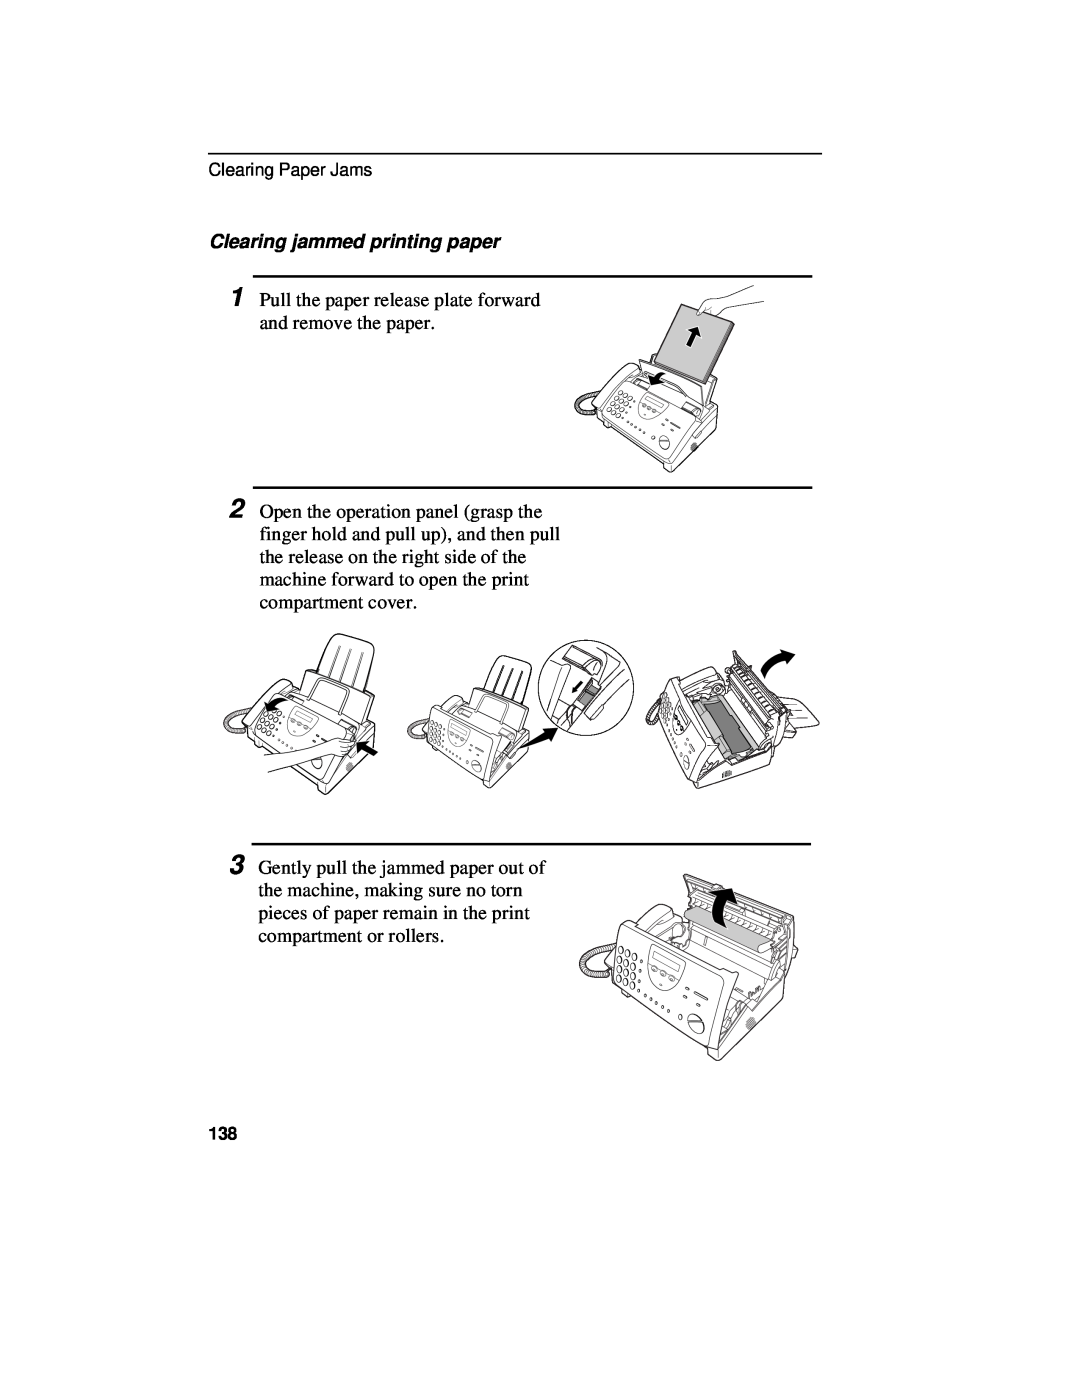 Sharp UX-460 operation manual Clearing jammed printing paper 